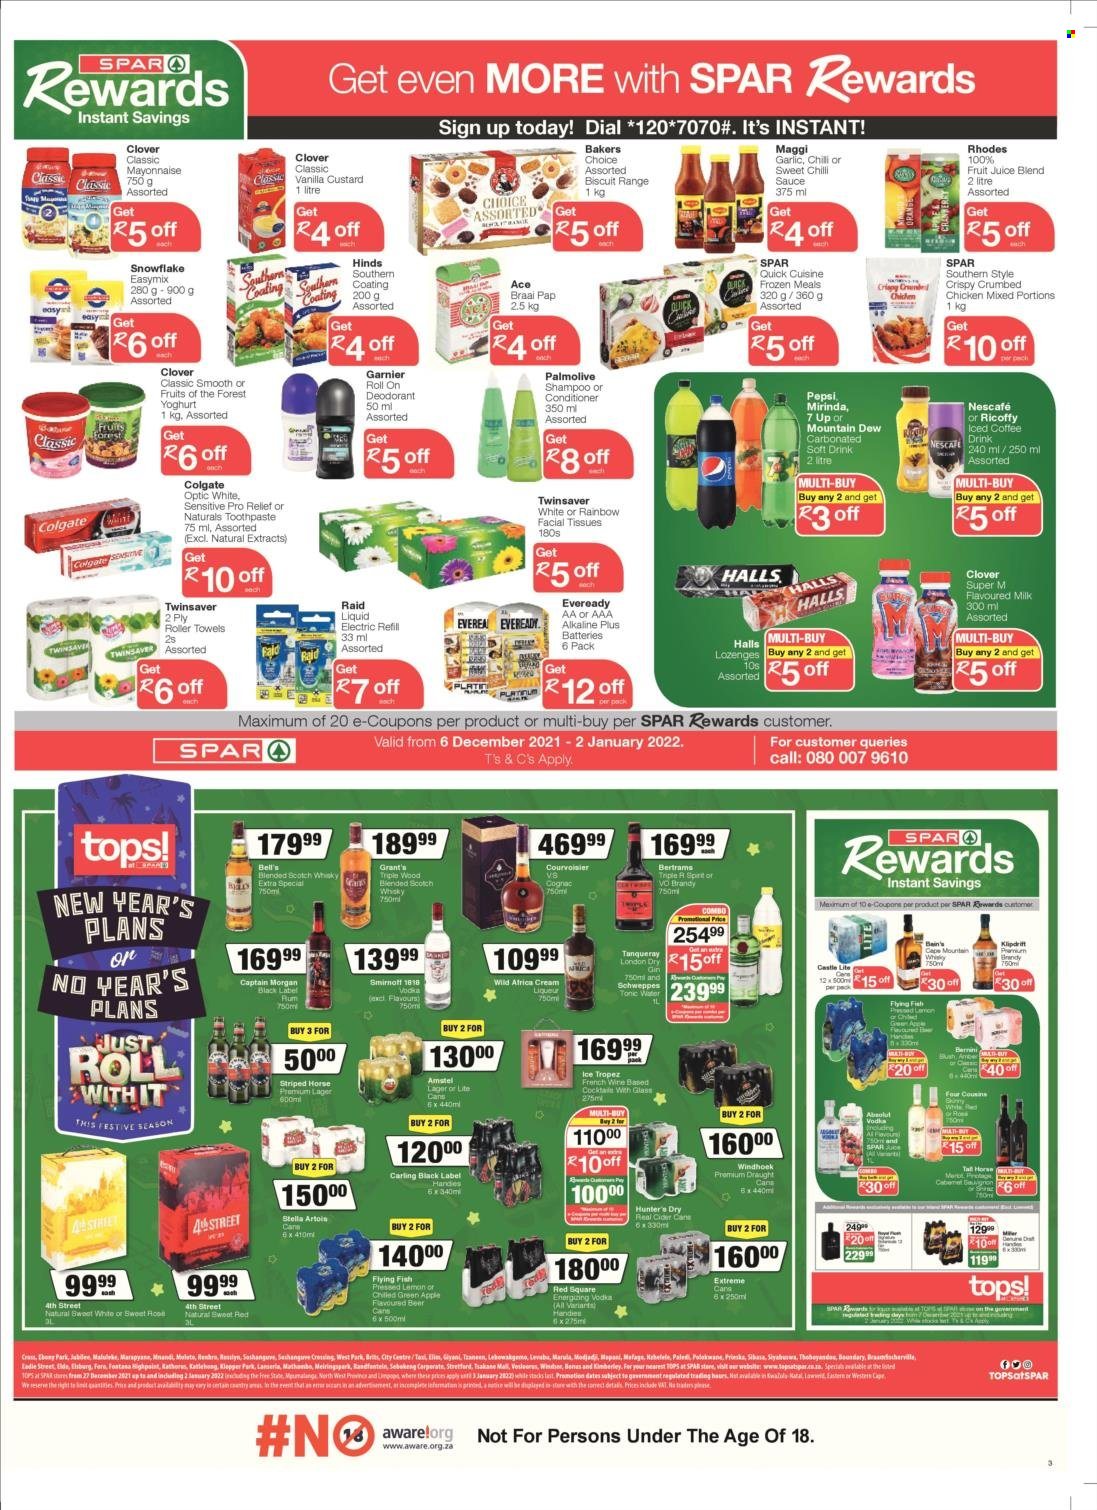 SPAR catalogue  - 27/12/2021 - 02/01/2022 - Sales products - Ace, garlic, fish, sauce, custard, yoghurt, Clover, milk, flavoured milk, mayonnaise, Halls, biscuit, Maggi, Hinds, Mountain Dew, Schweppes, Pepsi, fruit juice, juice, soft drink, iced coffee, carbonated soft drink, Ricoffy, Nescafé, Captain Morgan, cognac, liqueur, rum, vodka, Grant's, Klipdrift, Red Square, Hunter's Dry, scotch whisky, whisky, cider, beer, Carling, Lager, tissues, kitchen towels, paper towels, shampoo, Palmolive, Dial, Colgate, toothpaste, facial tissues, Garnier, conditioner, anti-perspirant, roll-on, deodorant, Raid, Bakers, braai. Page 3.